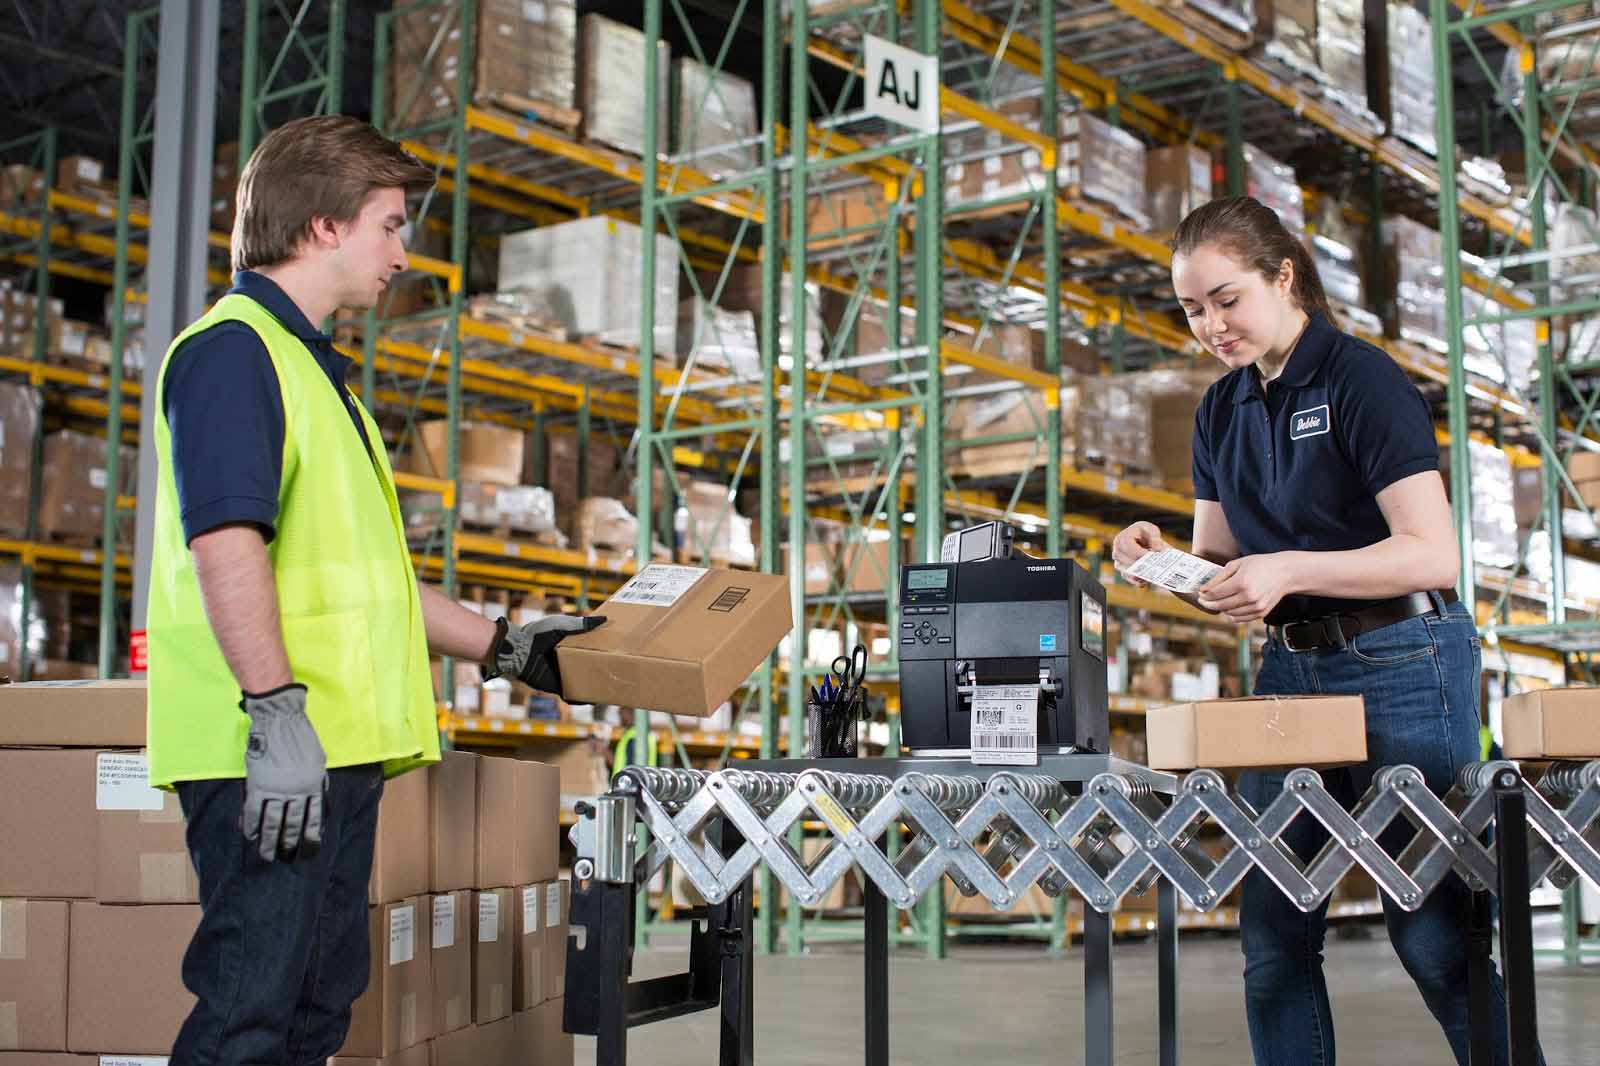 Traceability in the warehouse